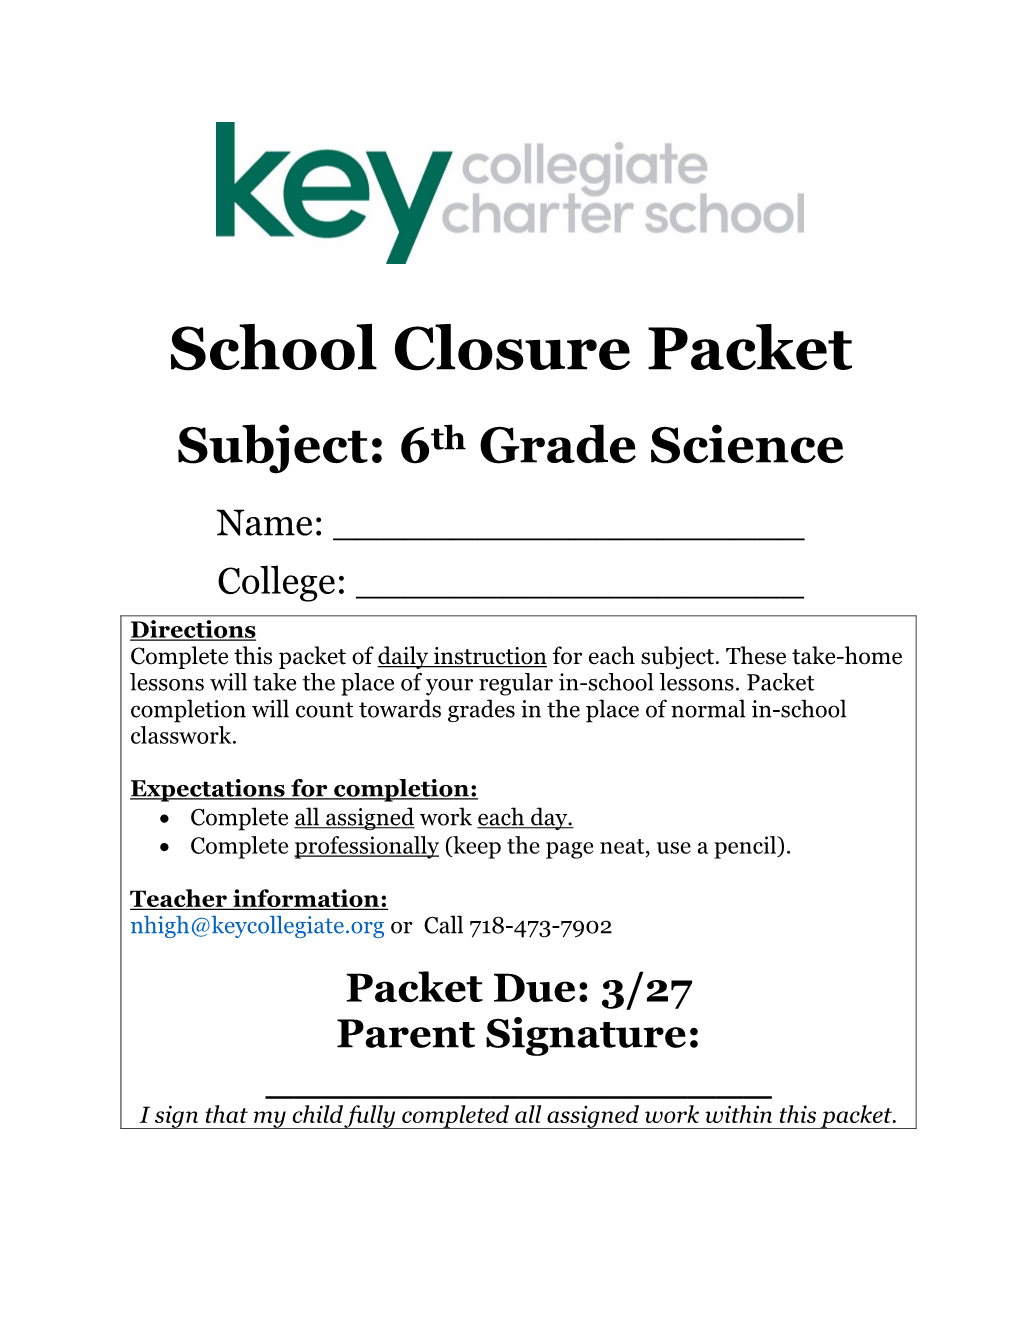 School Closure Packet Subject: 6Th Grade Science Name: ______College: ______Directions Complete This Packet of Daily Instruction for Each Subject